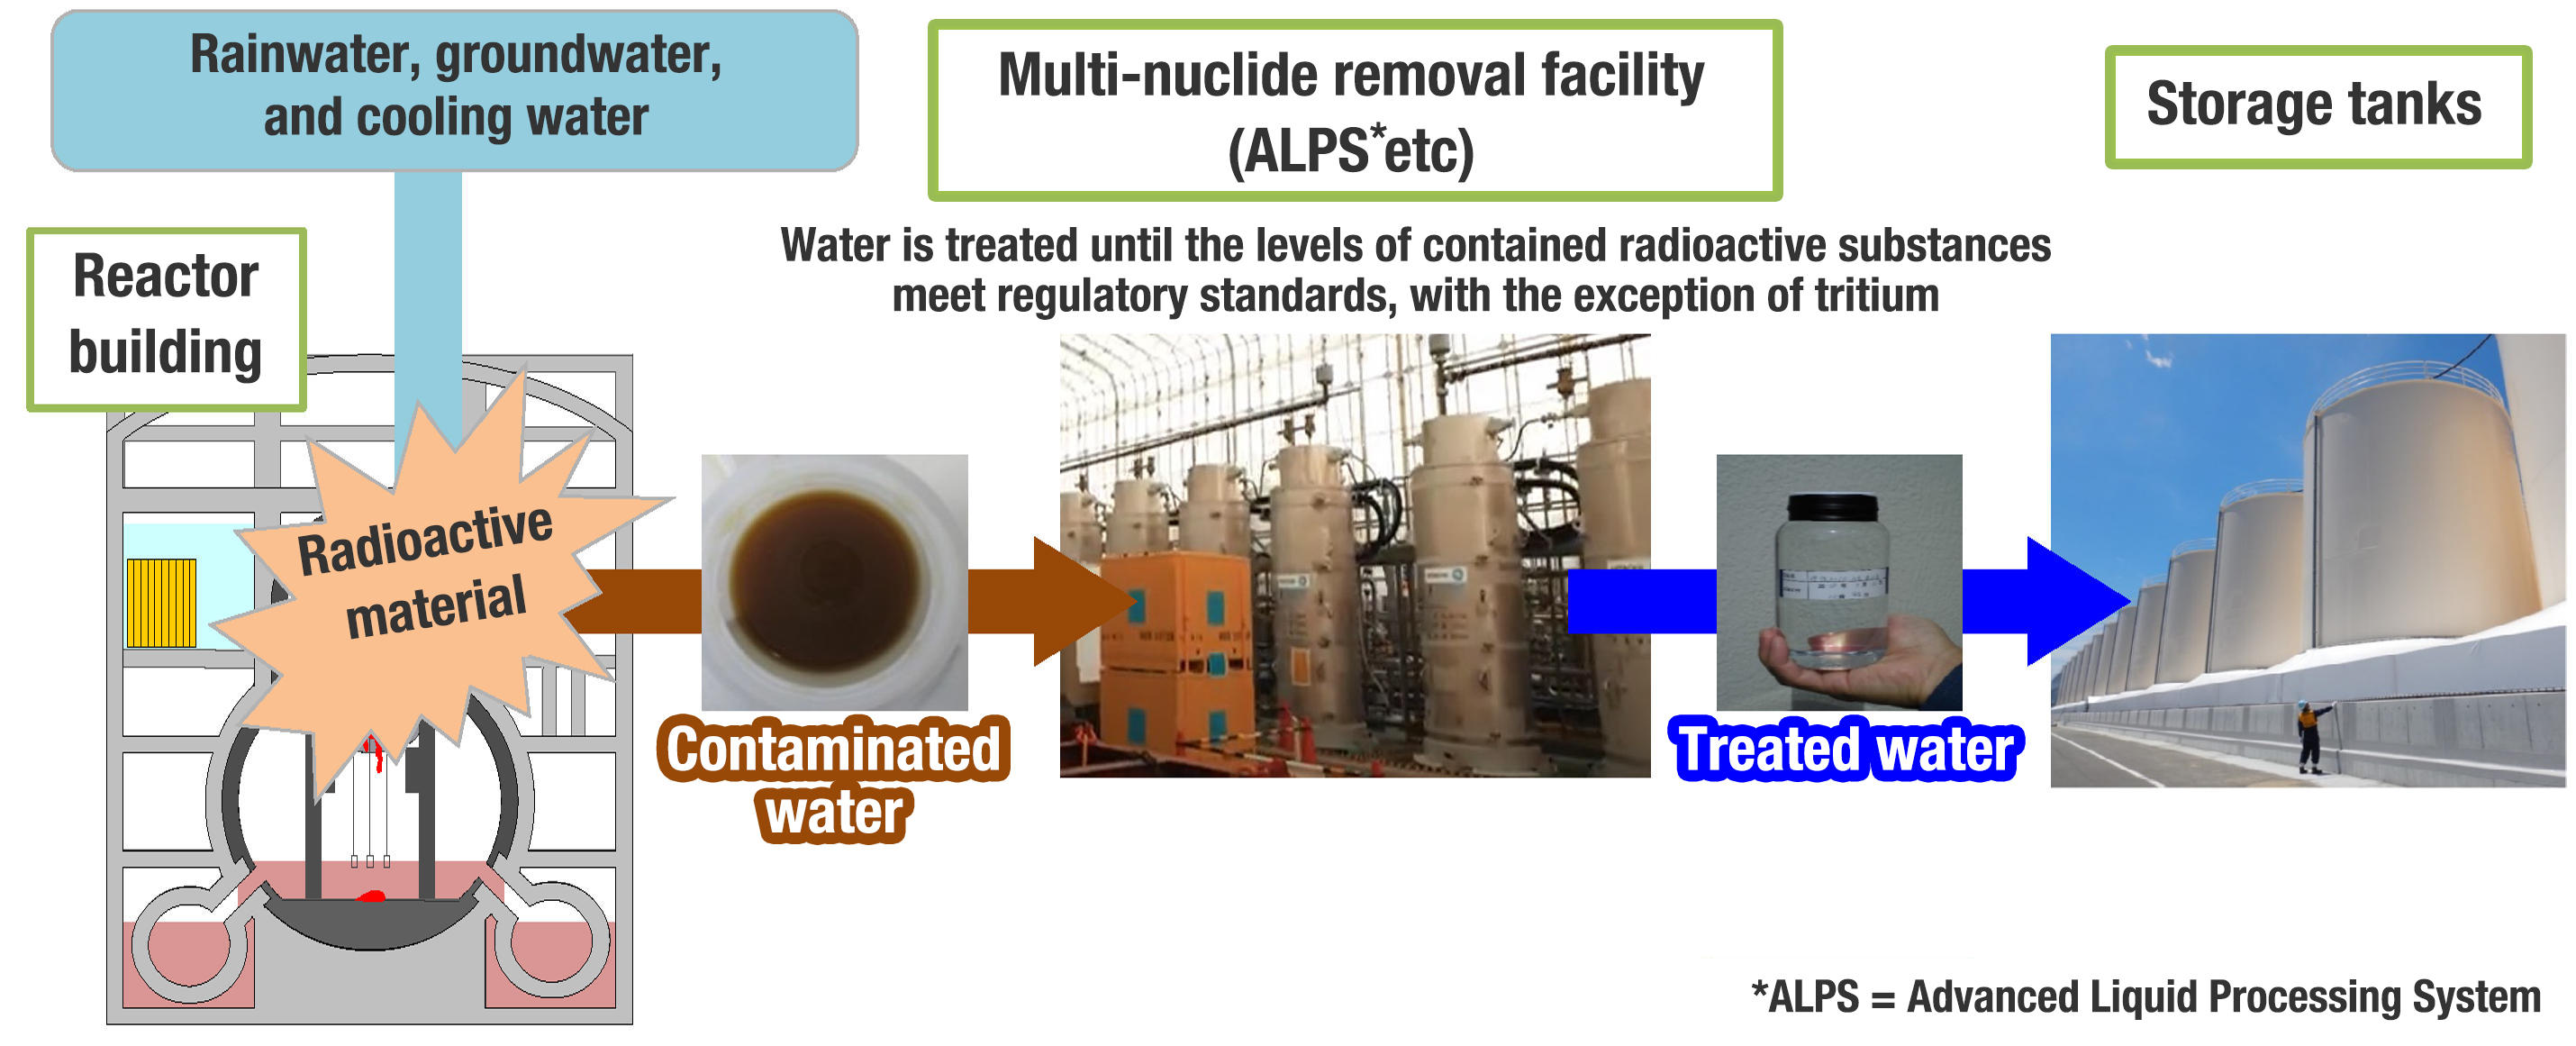 Contaminated water contains high levels of radioactive materials and is generated on a daily basis from the reactor building